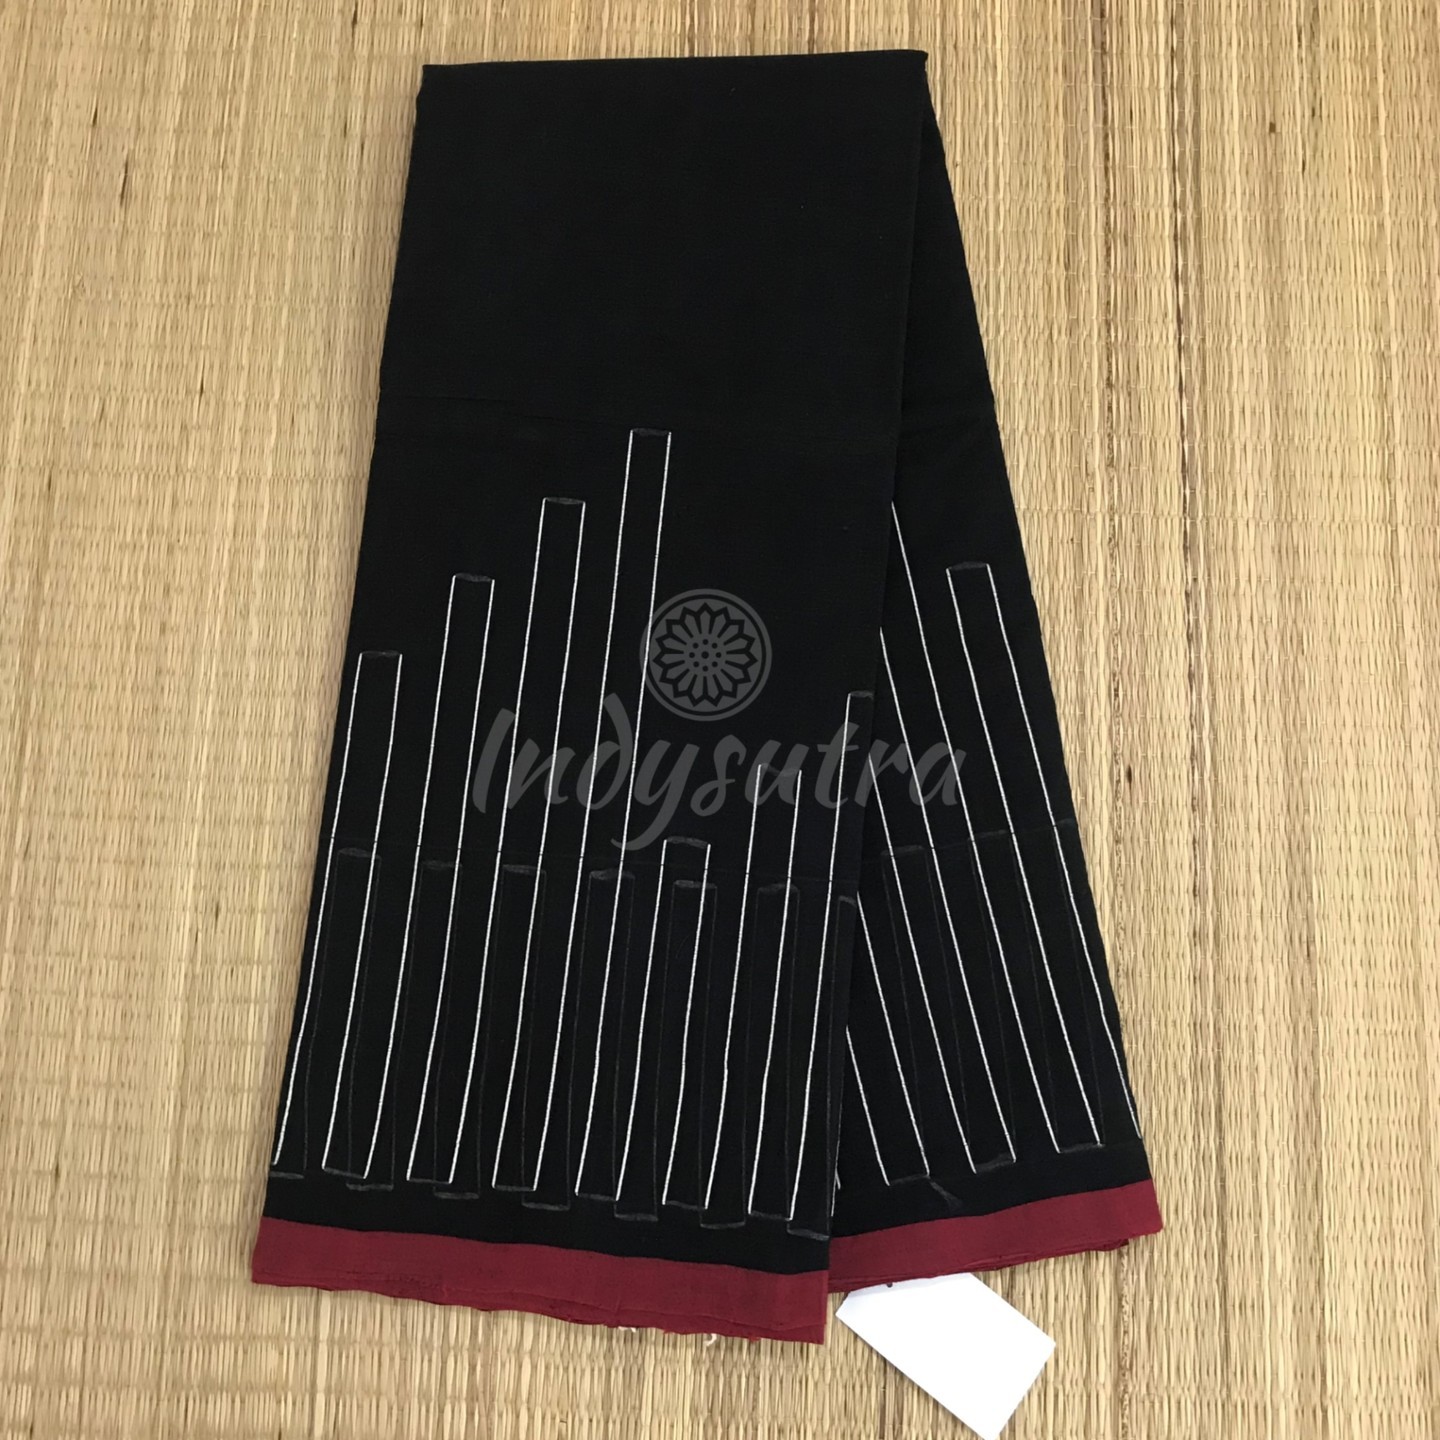 Black saree with small red border